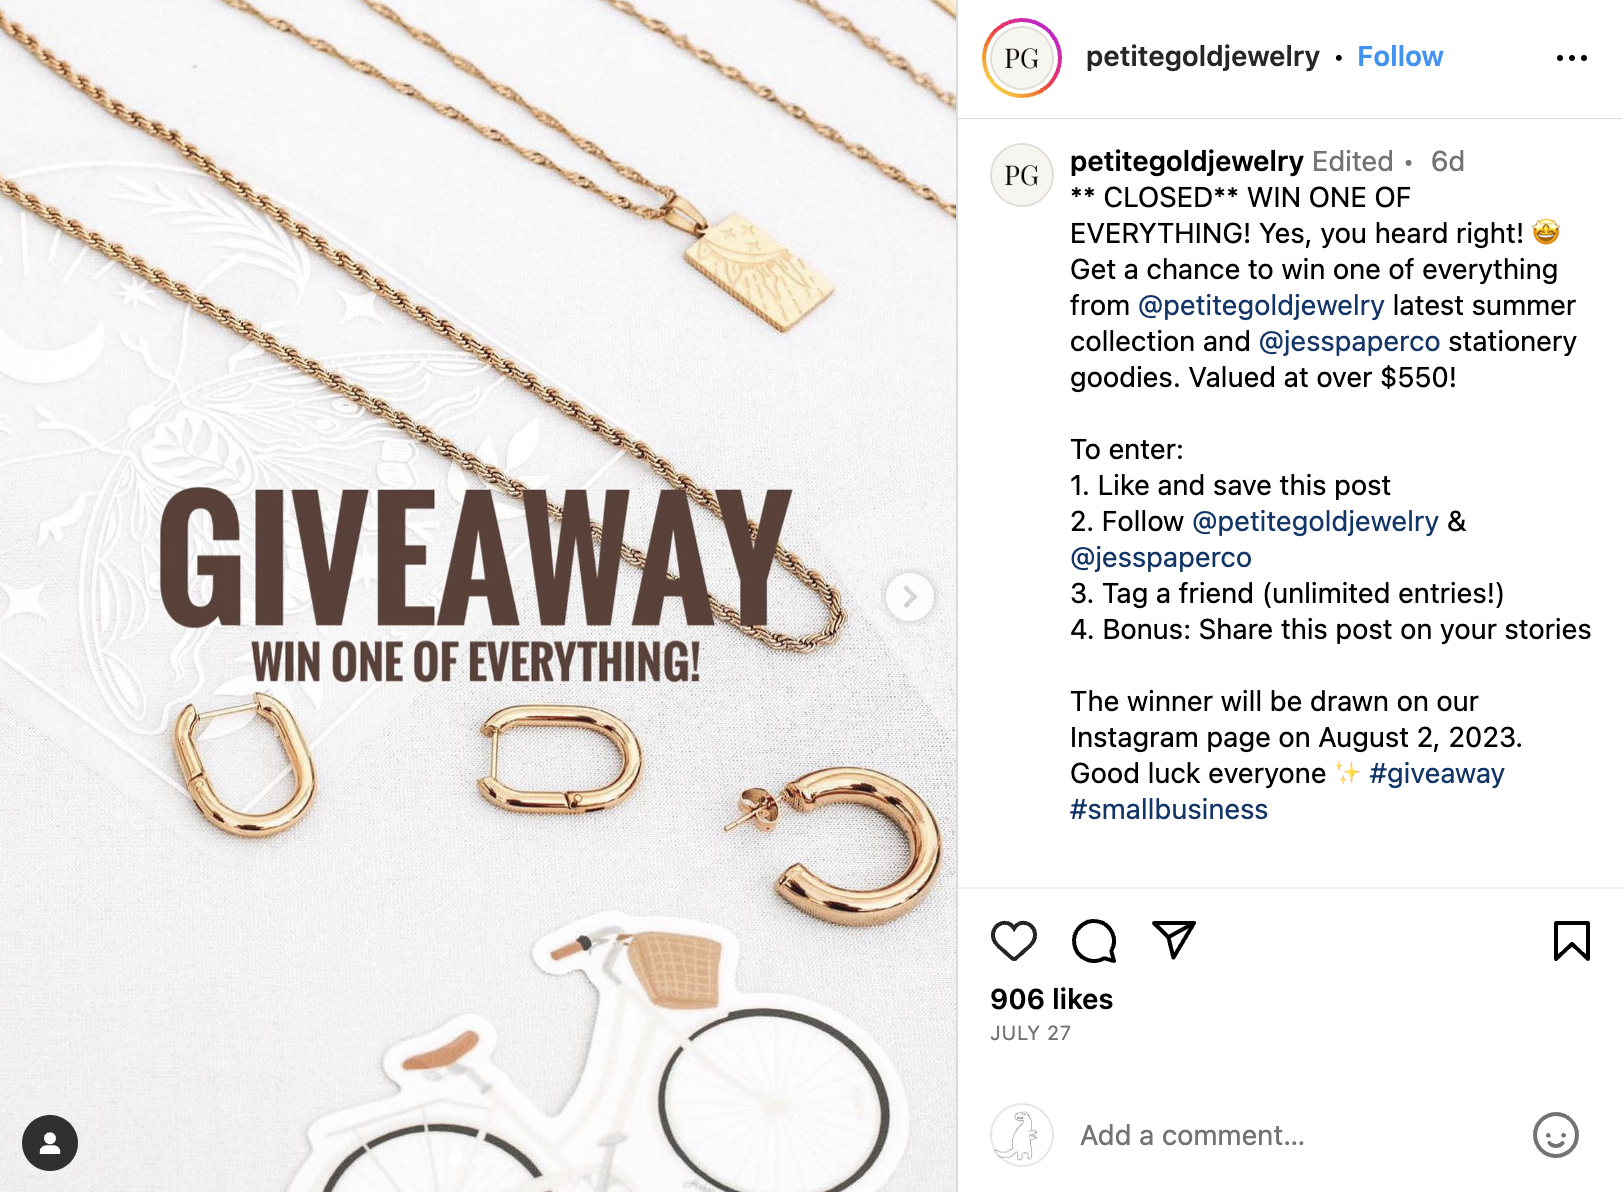 How to word a giveaway post - Successful Instagram giveaway example  - Petite Gold Jewelry giveaway